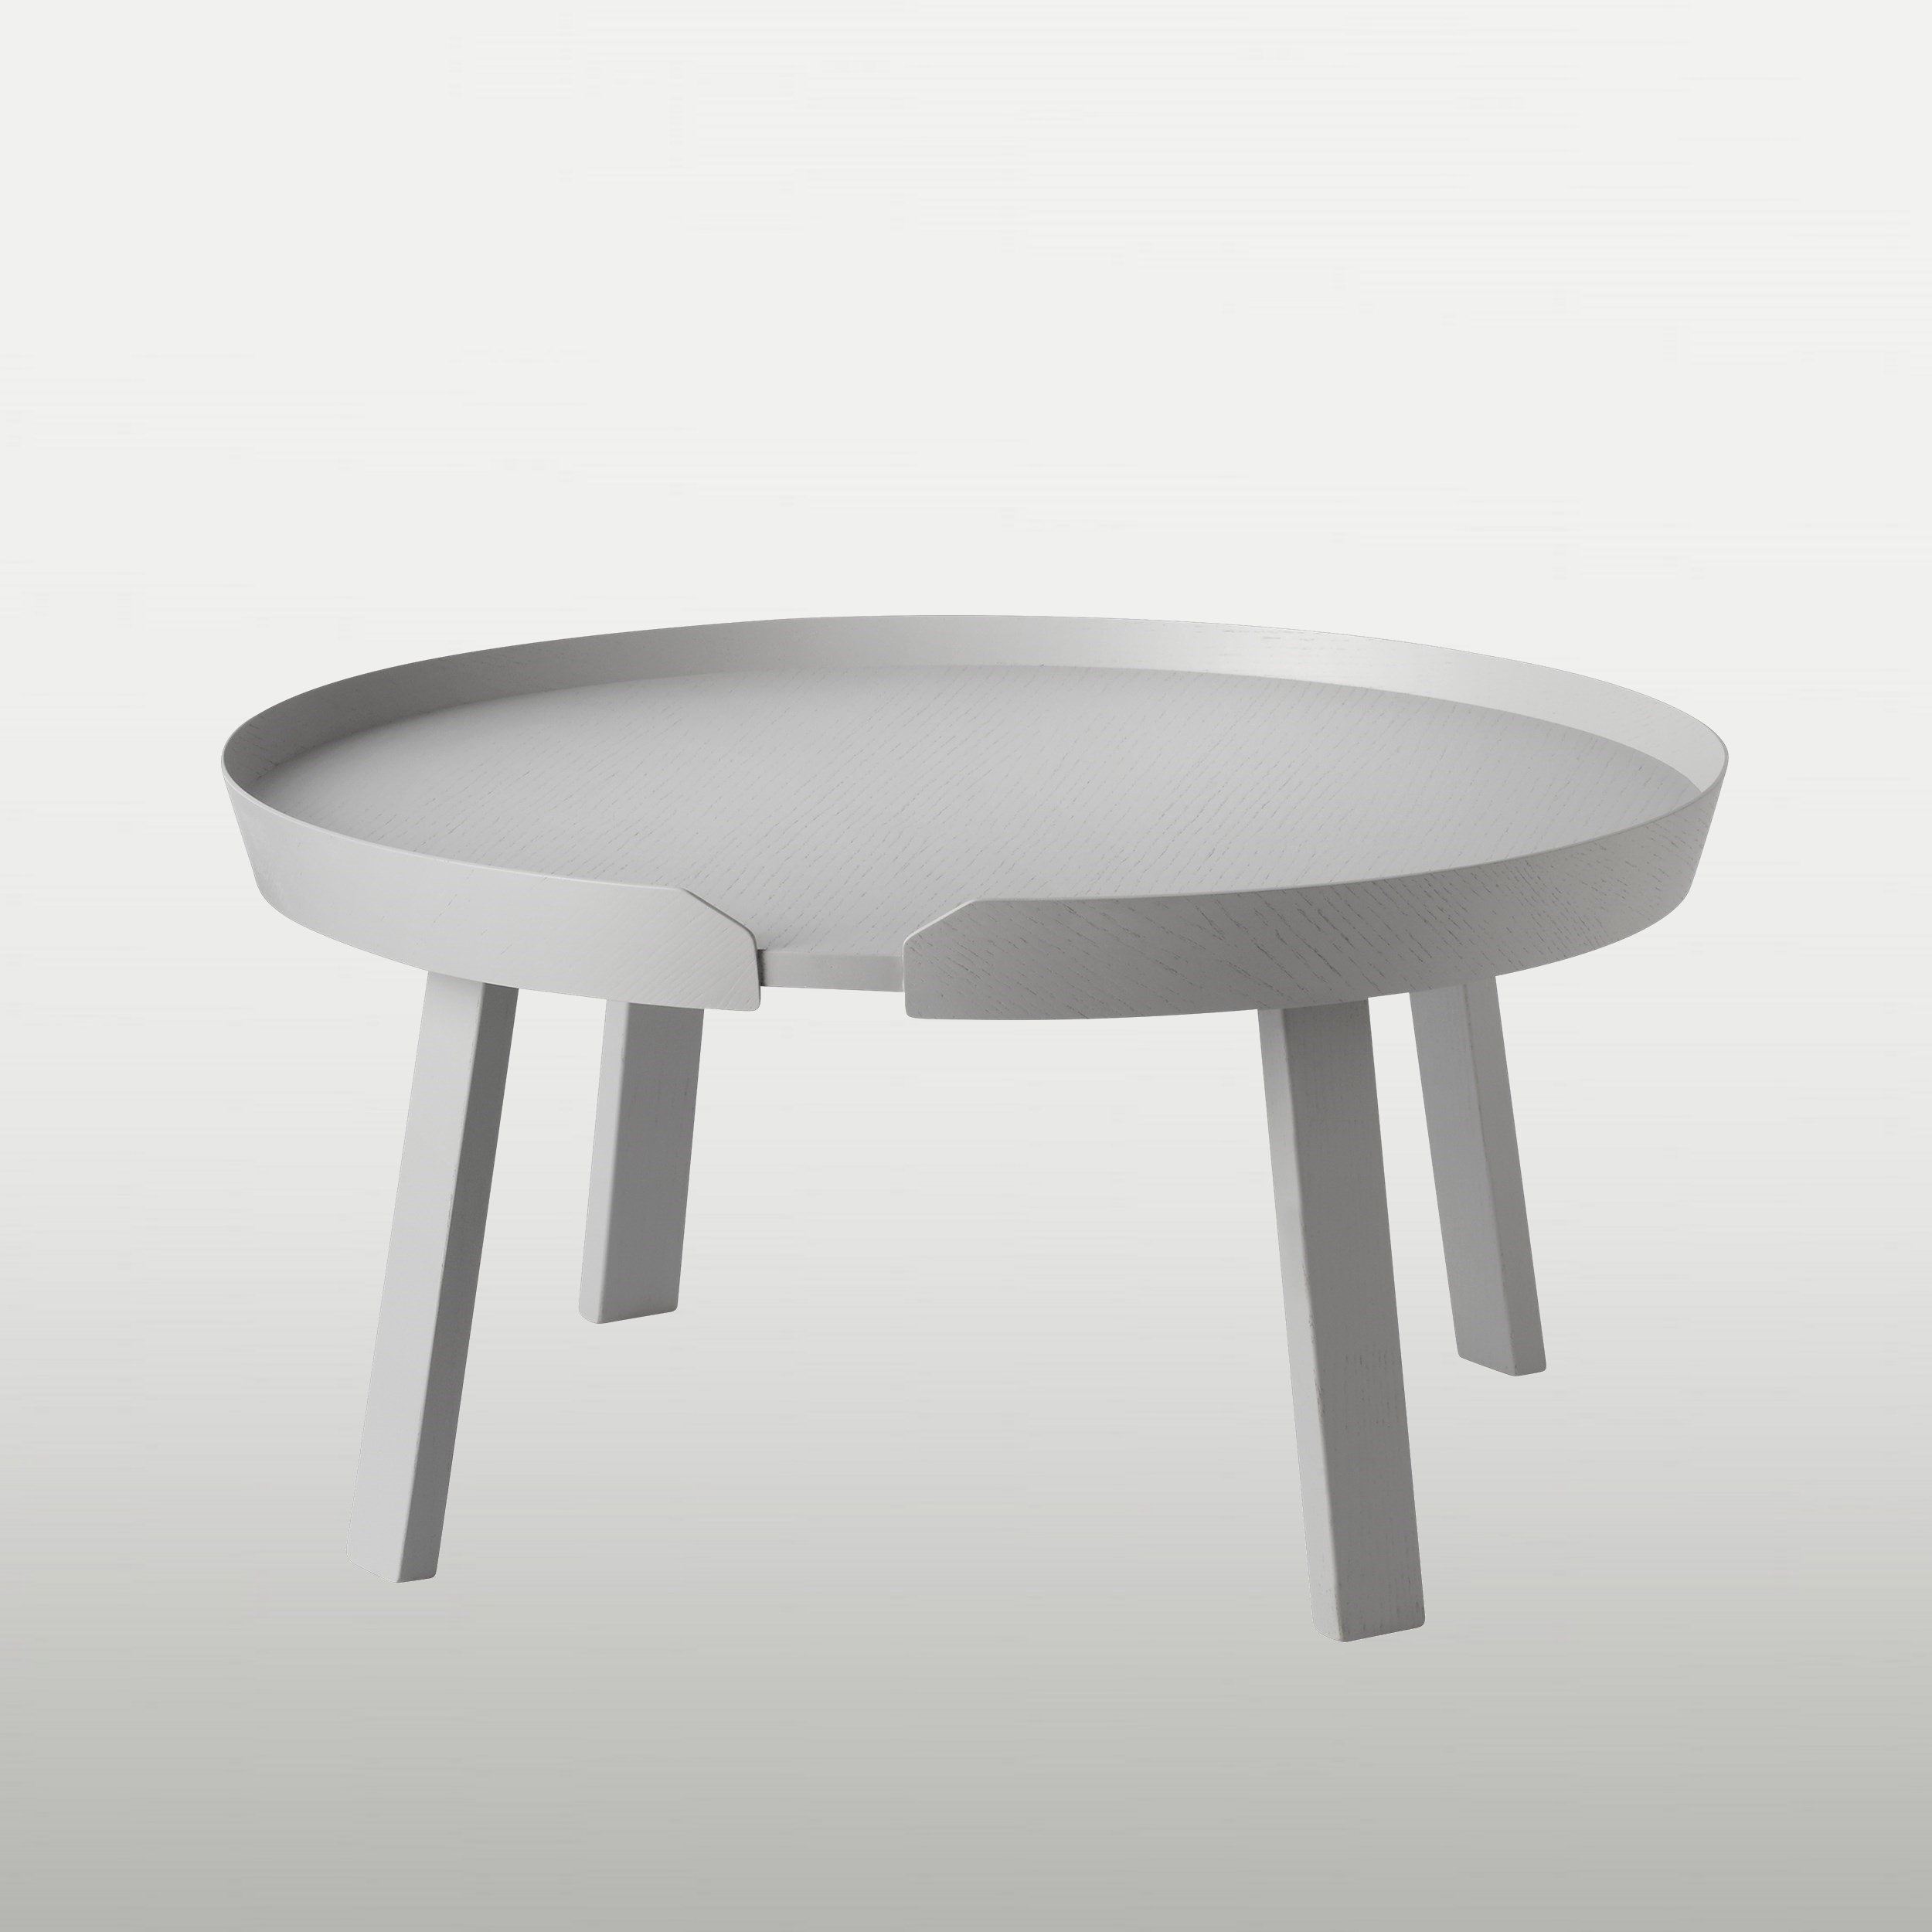 Lounge table Around L, D72 H36, gray